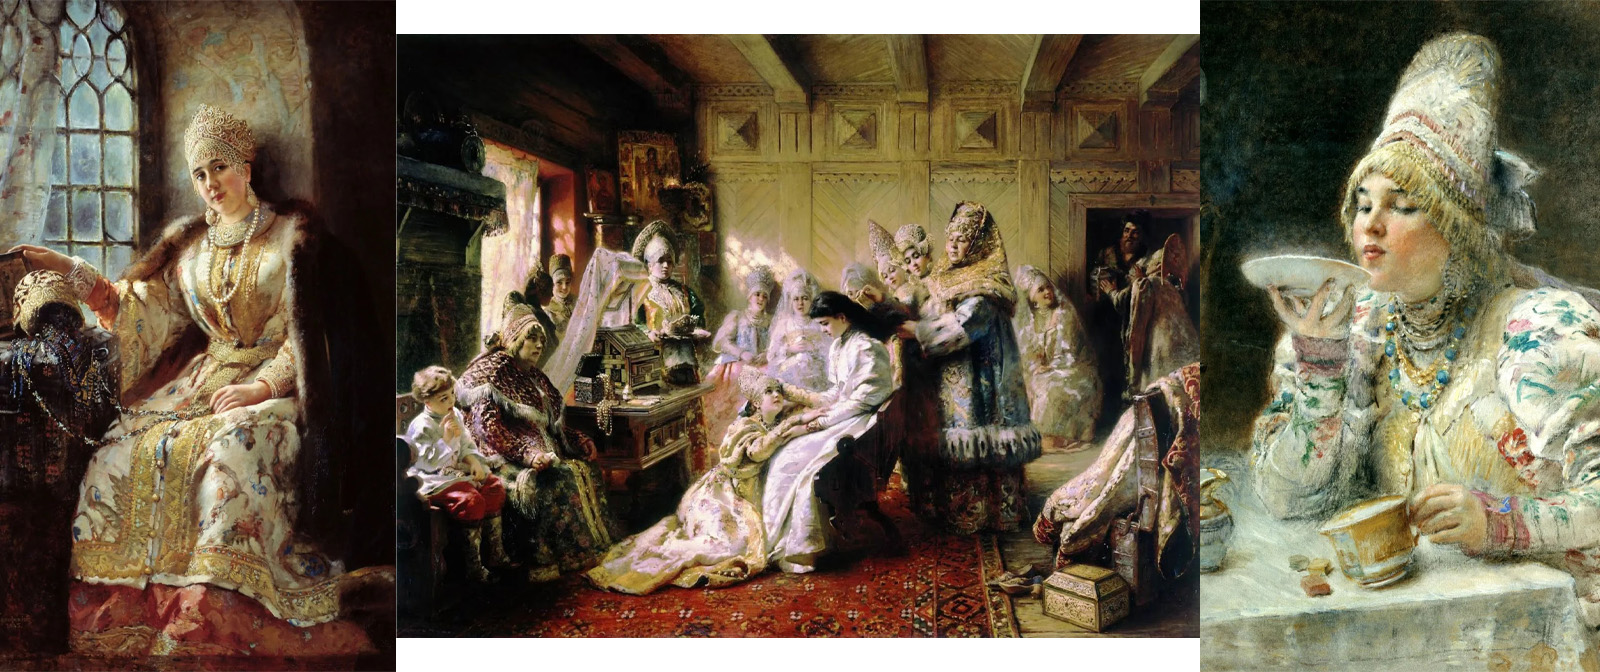 An immodest custom that Konstantin Makovsky depicted in his painting 